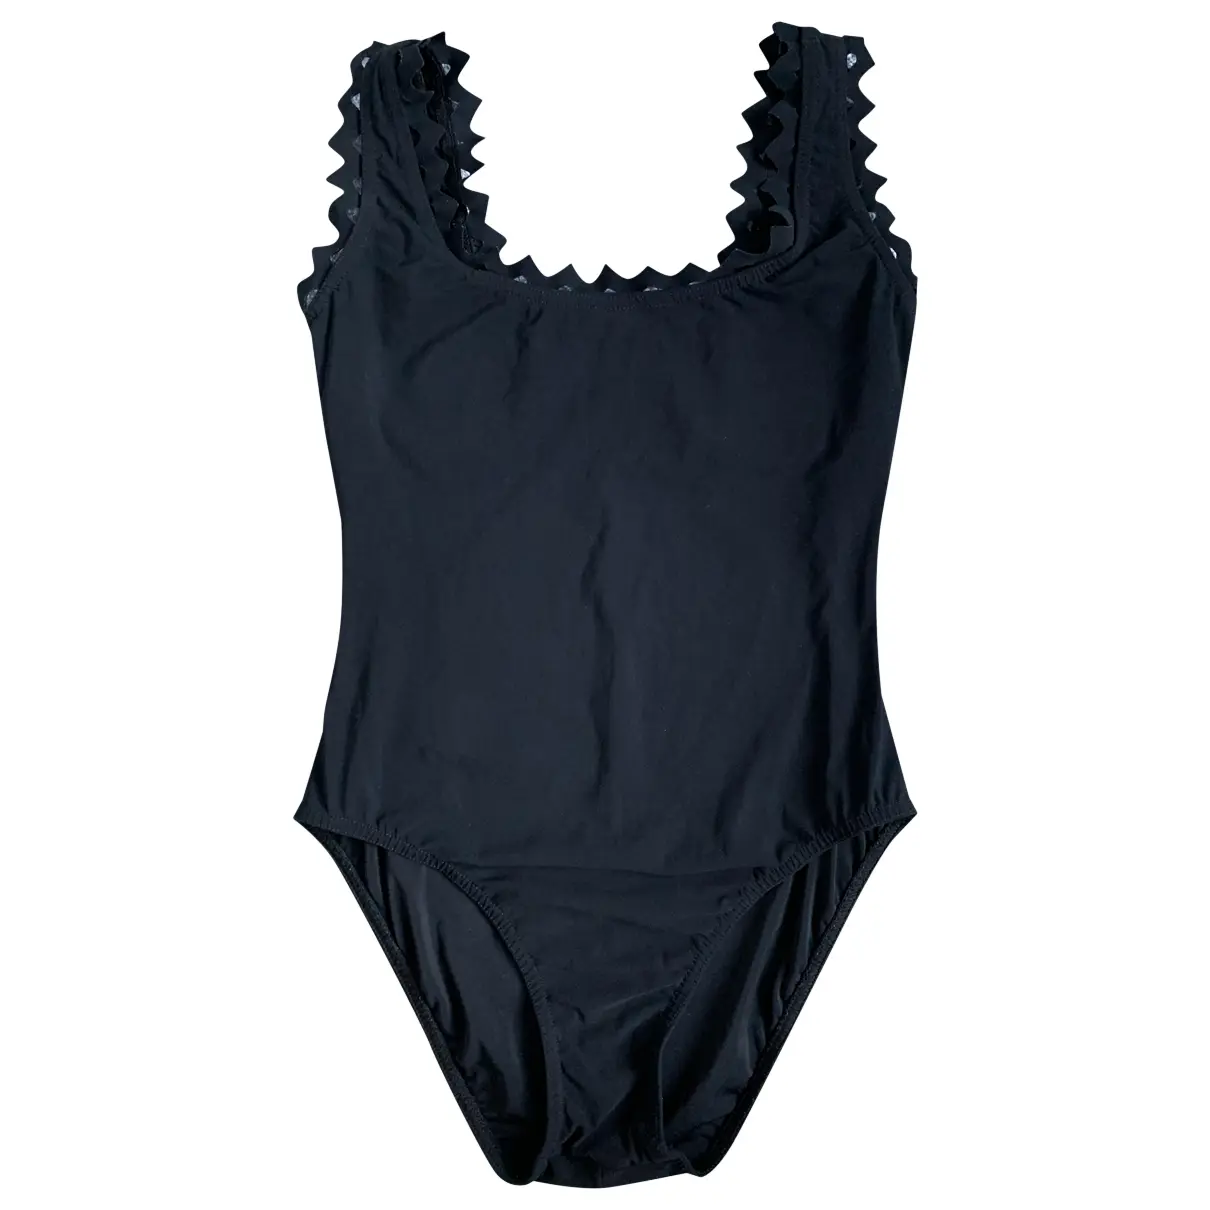 One-piece swimsuit Karla Colletto